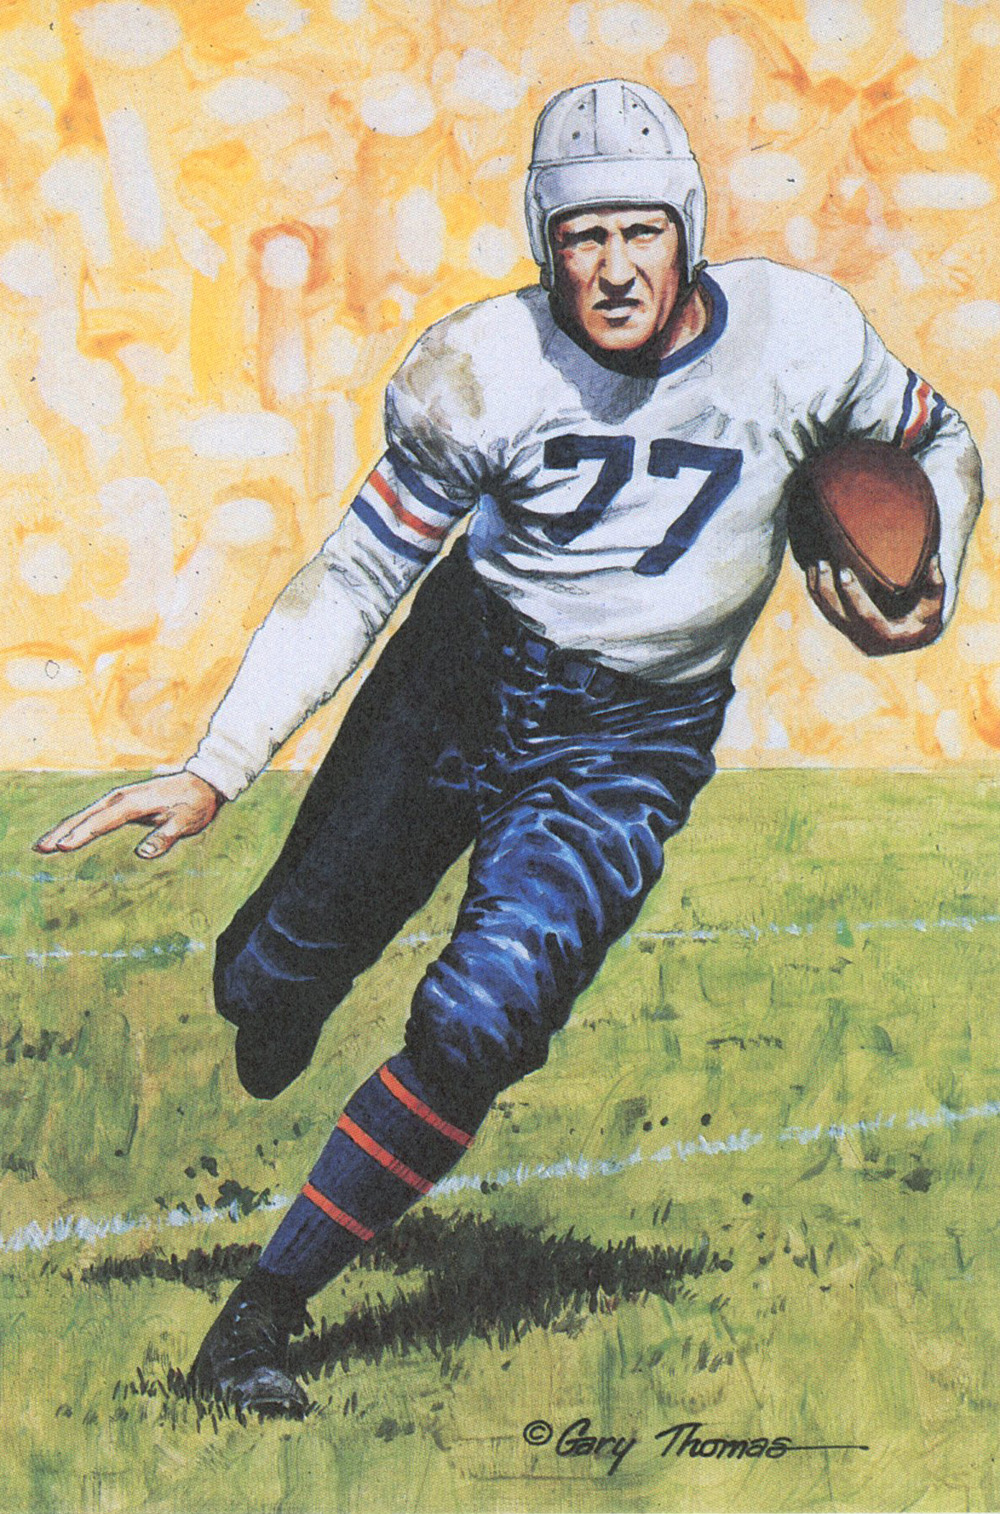 Red Grange Unsigned 1989 Series One Goal Line Art Card Chicago Bears